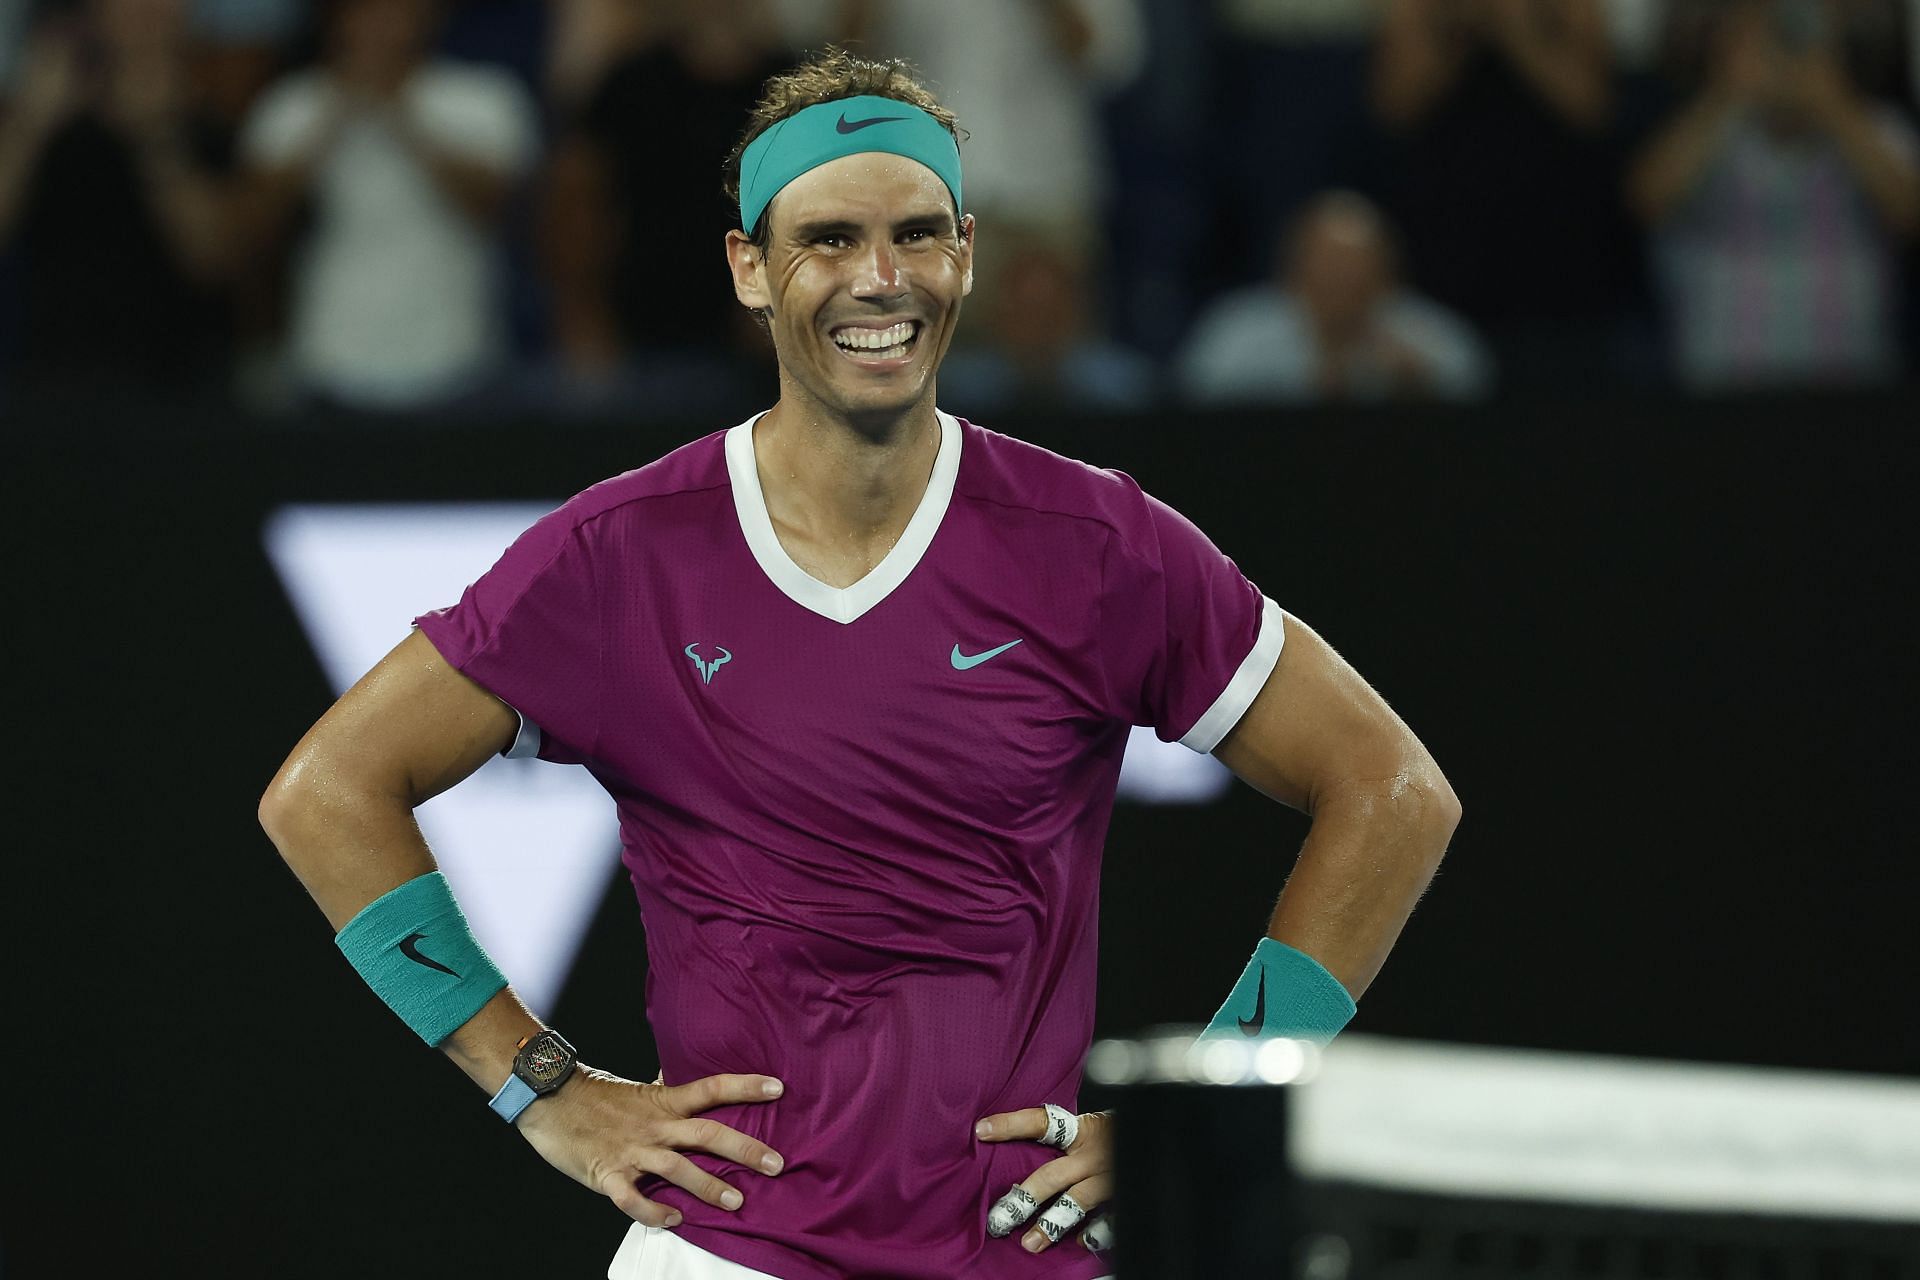 Rafael Nadal broke the three-way tie for the most number of singles Grand Slam titles at 2022 Australian Open.